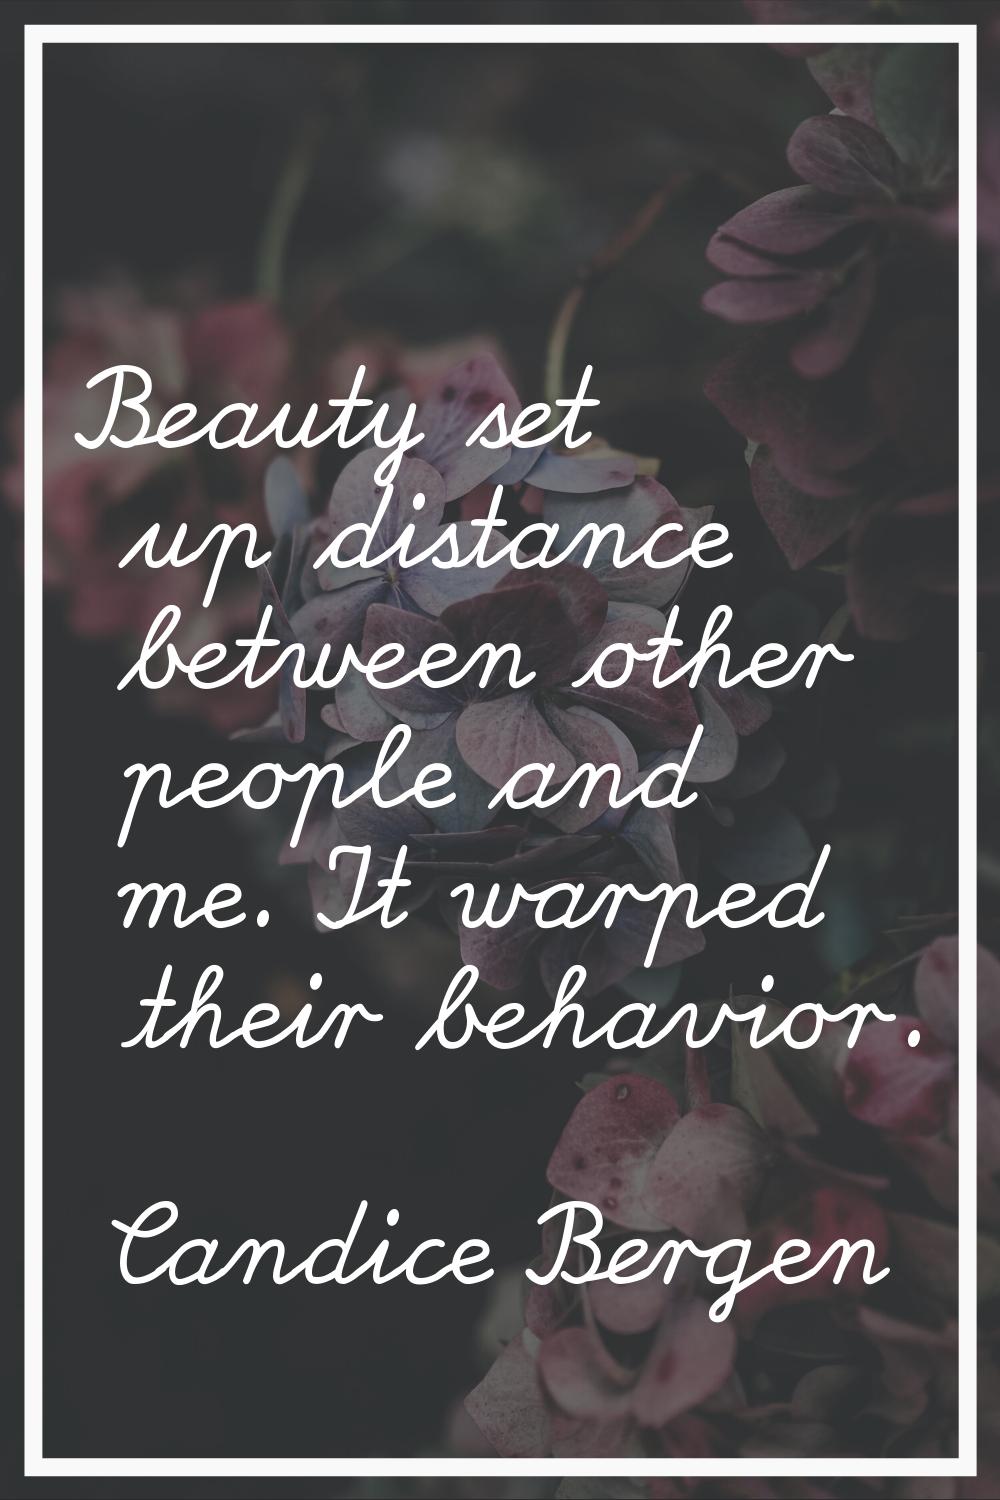 Beauty set up distance between other people and me. It warped their behavior.